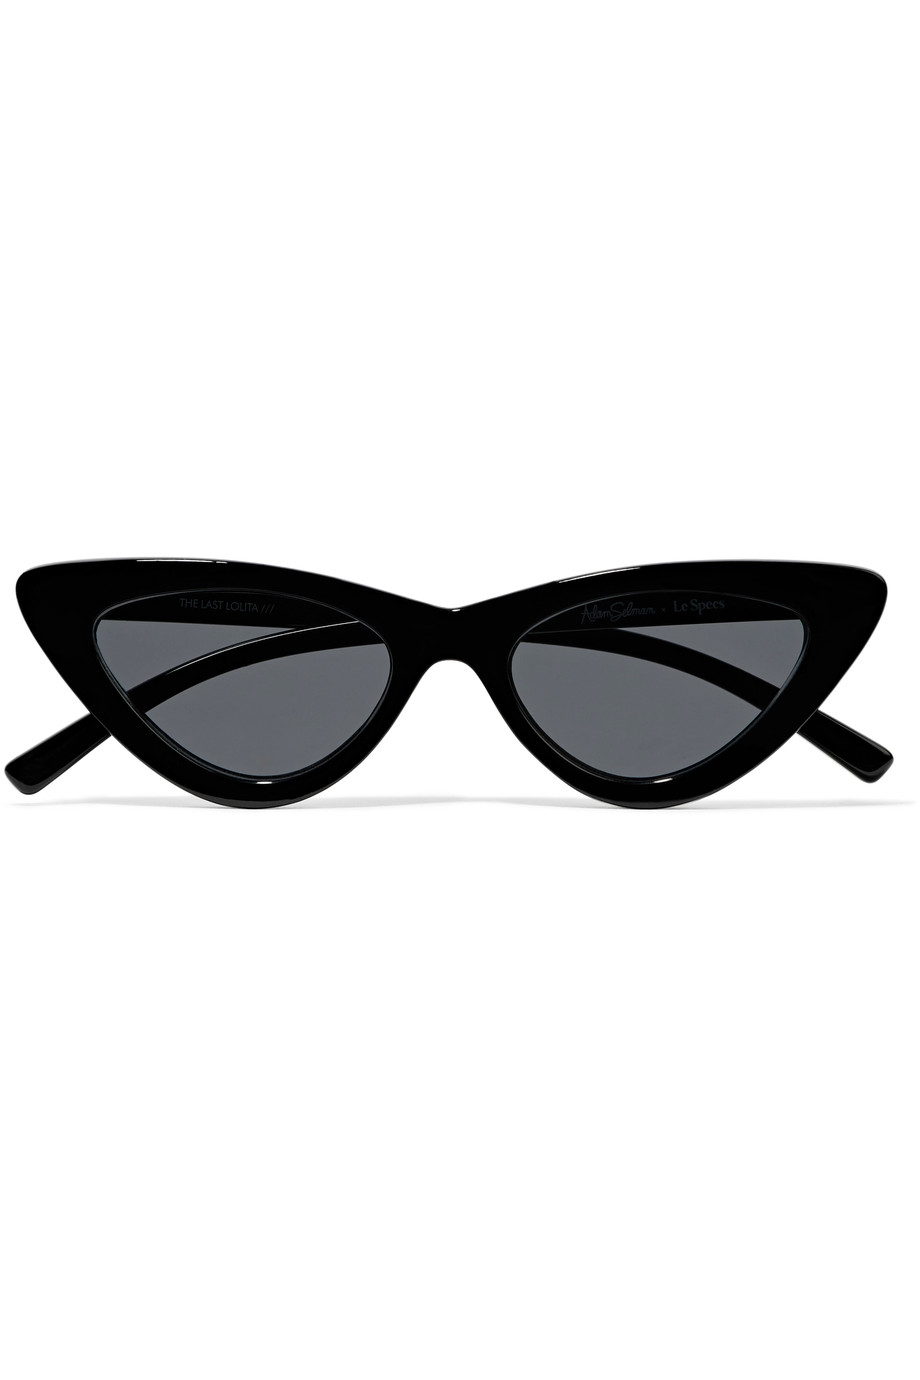 15 Best Pairs Of Cat Eye Sunglasses For Women In 2020 Glowsly